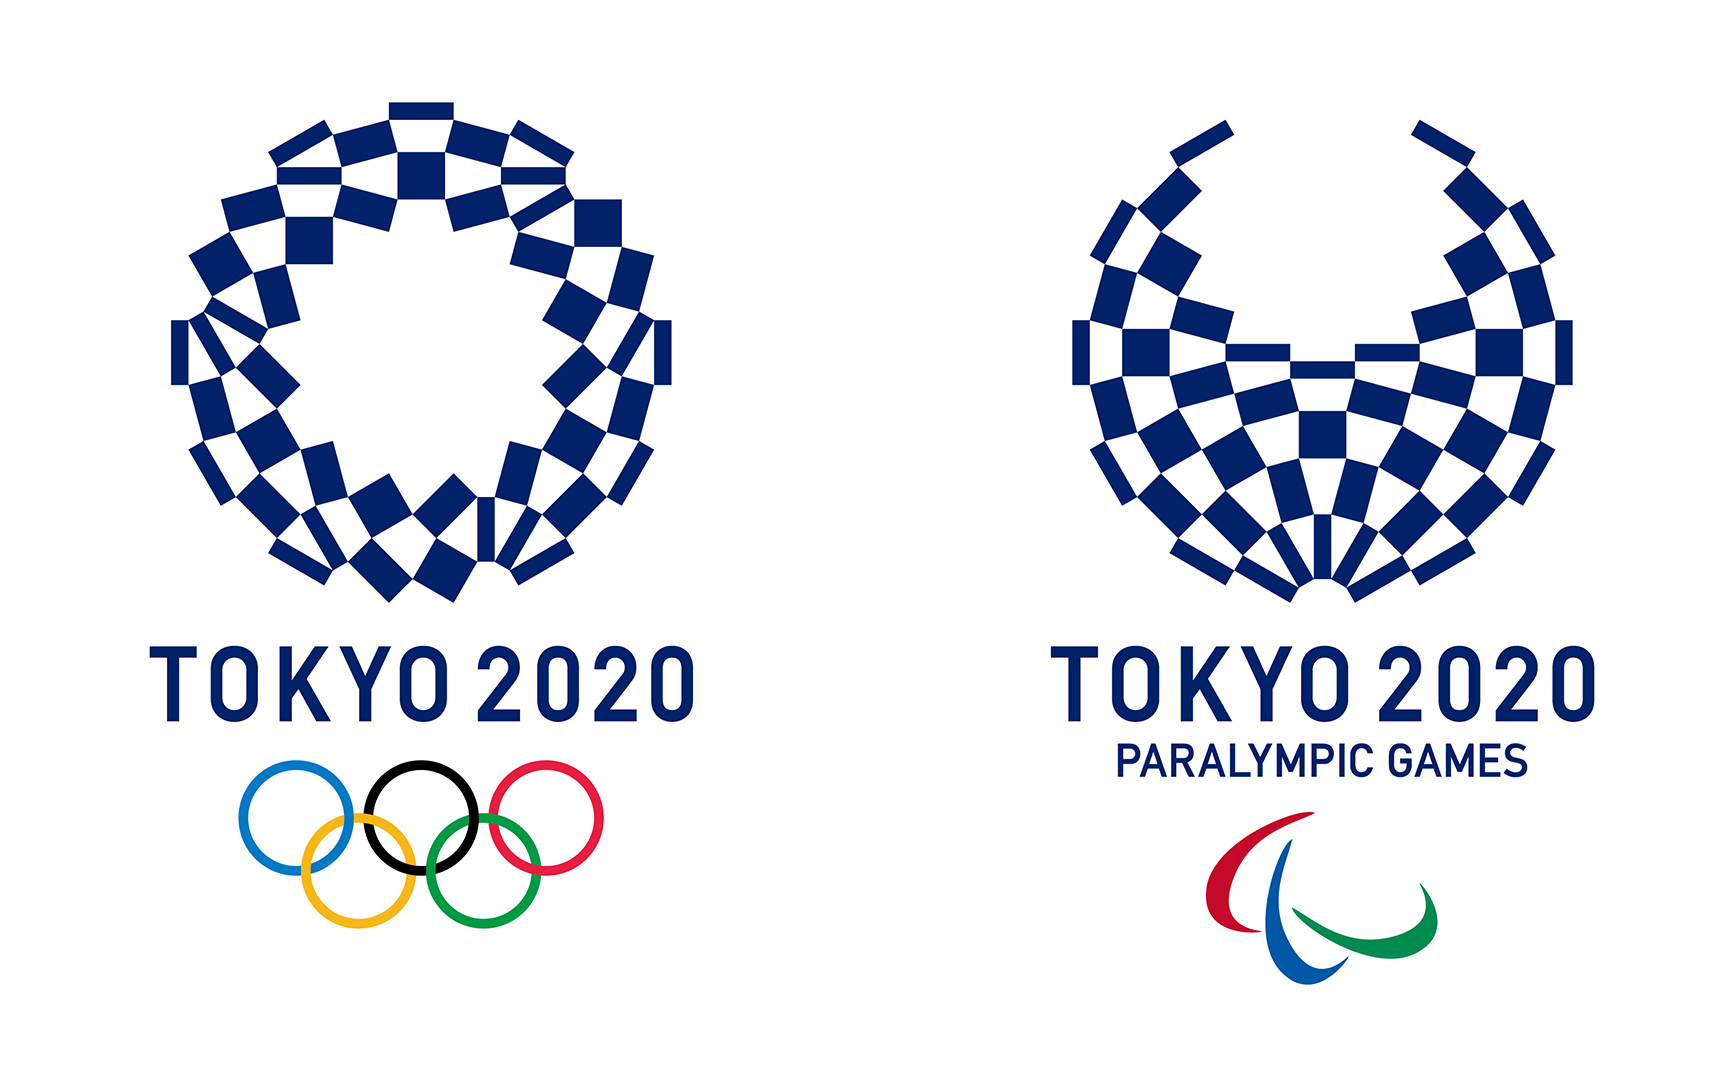 Tokyo Picks New Logo For 2020 Olympics After Plagiarism Debacle